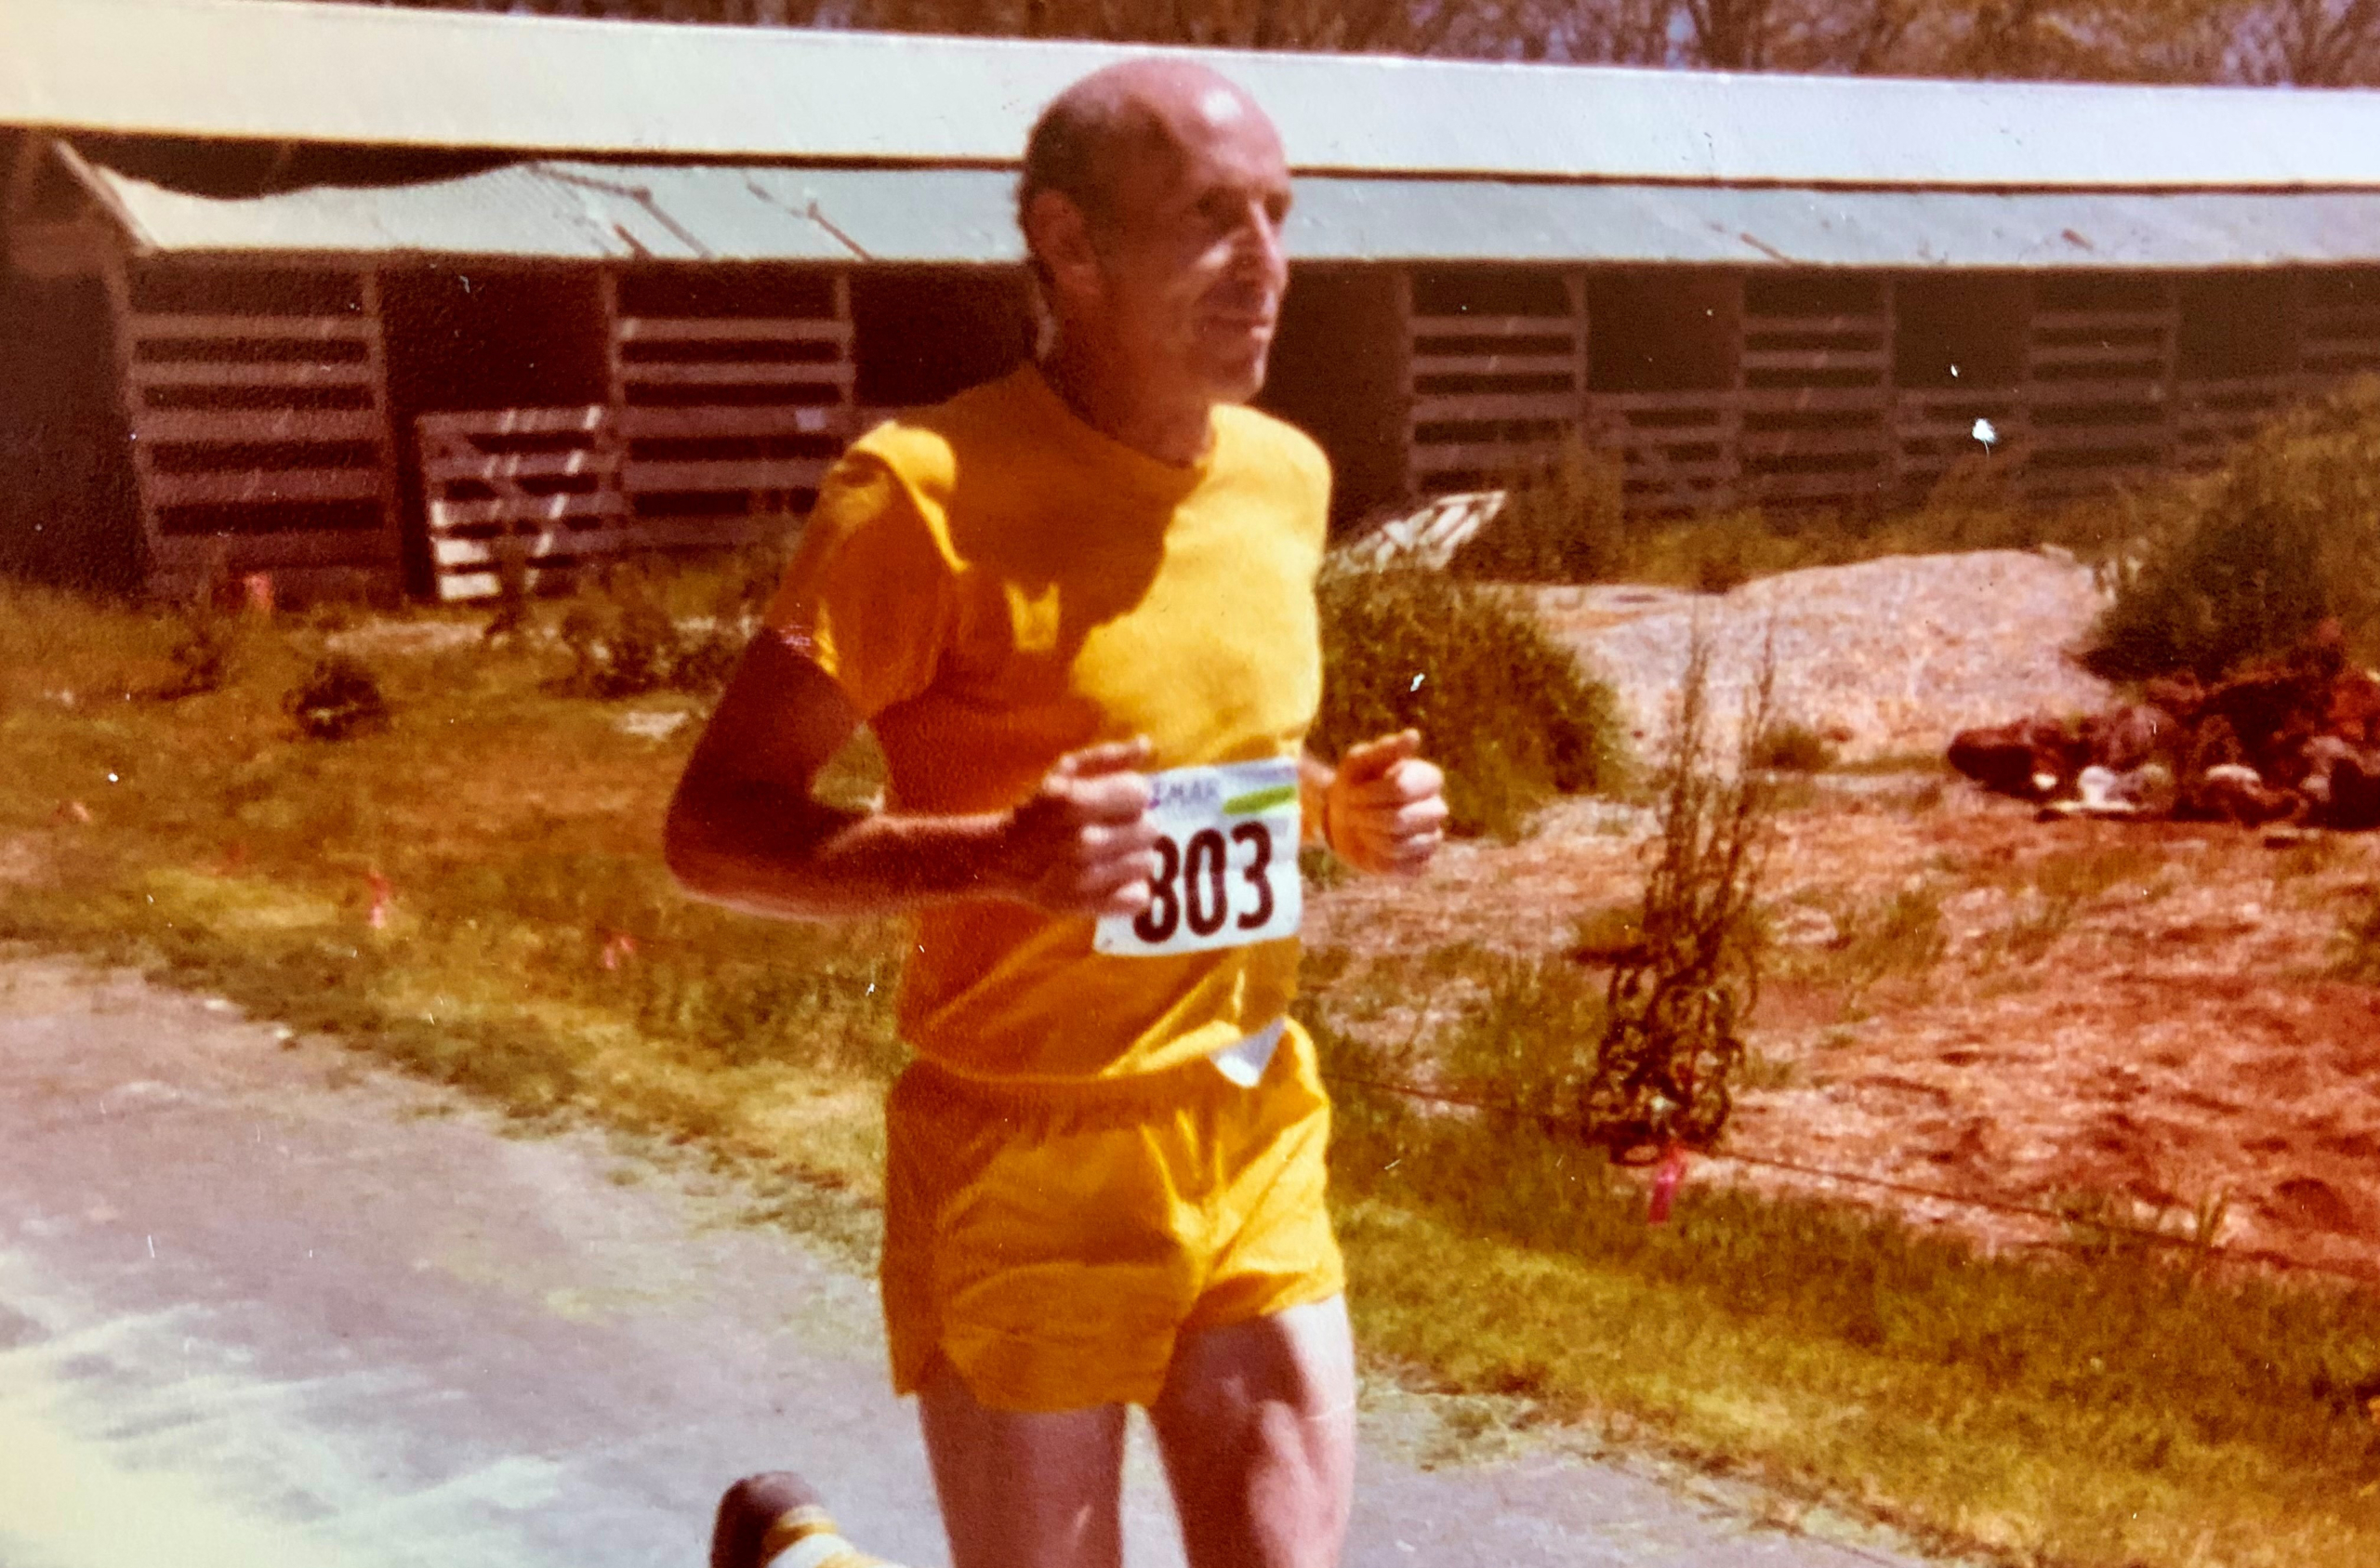 Dr. Robert "Bob" Thomas shown running competitively, which was one of his many passions.